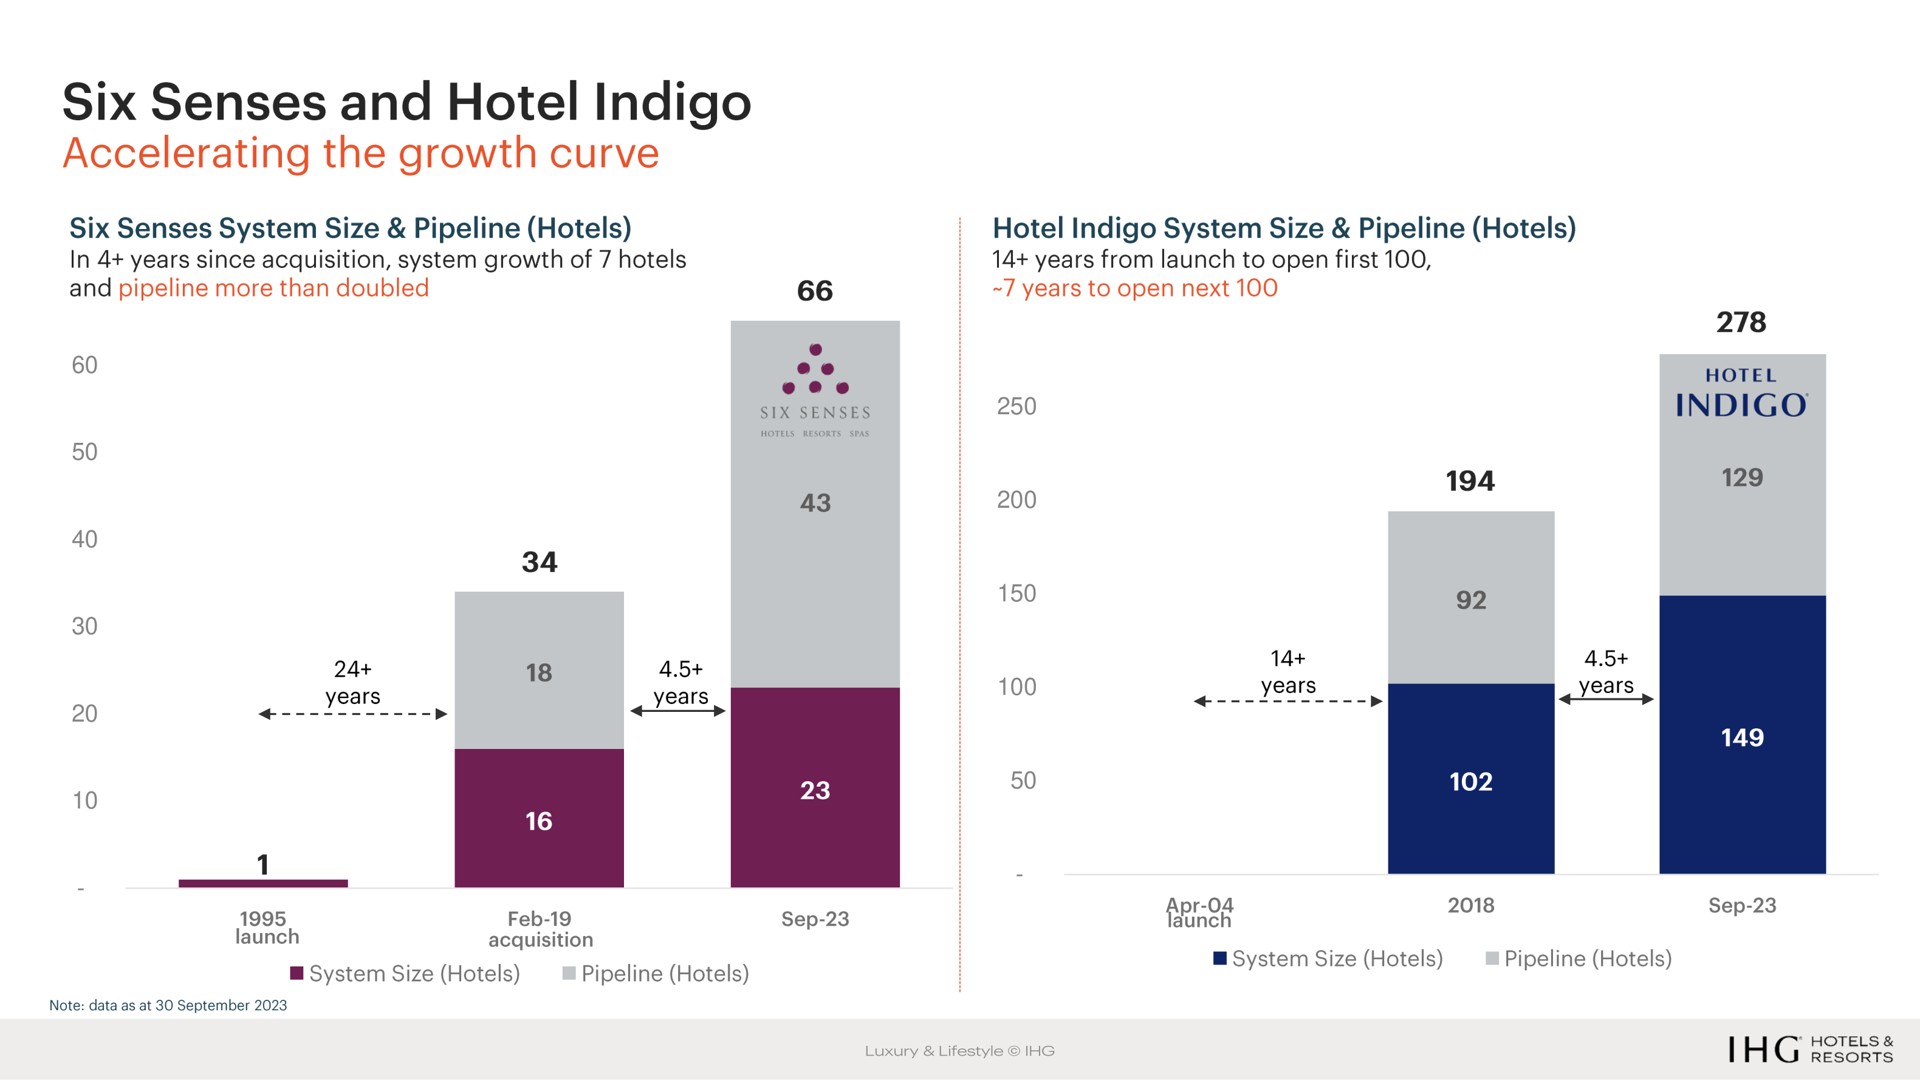 six senses and hotel indigo accelerating the growth curve six senses system size pipeline hotels in years since acquisition system growth of hotels and pipeline more than doubled hotel indigo system size pipeline hotels years from launch to open first years to open next six senses acquisition launch note data as at system size hotels pipeline hotels hotel indigo years oars as size hotel epee pipeline hotel haters luxury bes | IHG Hotels